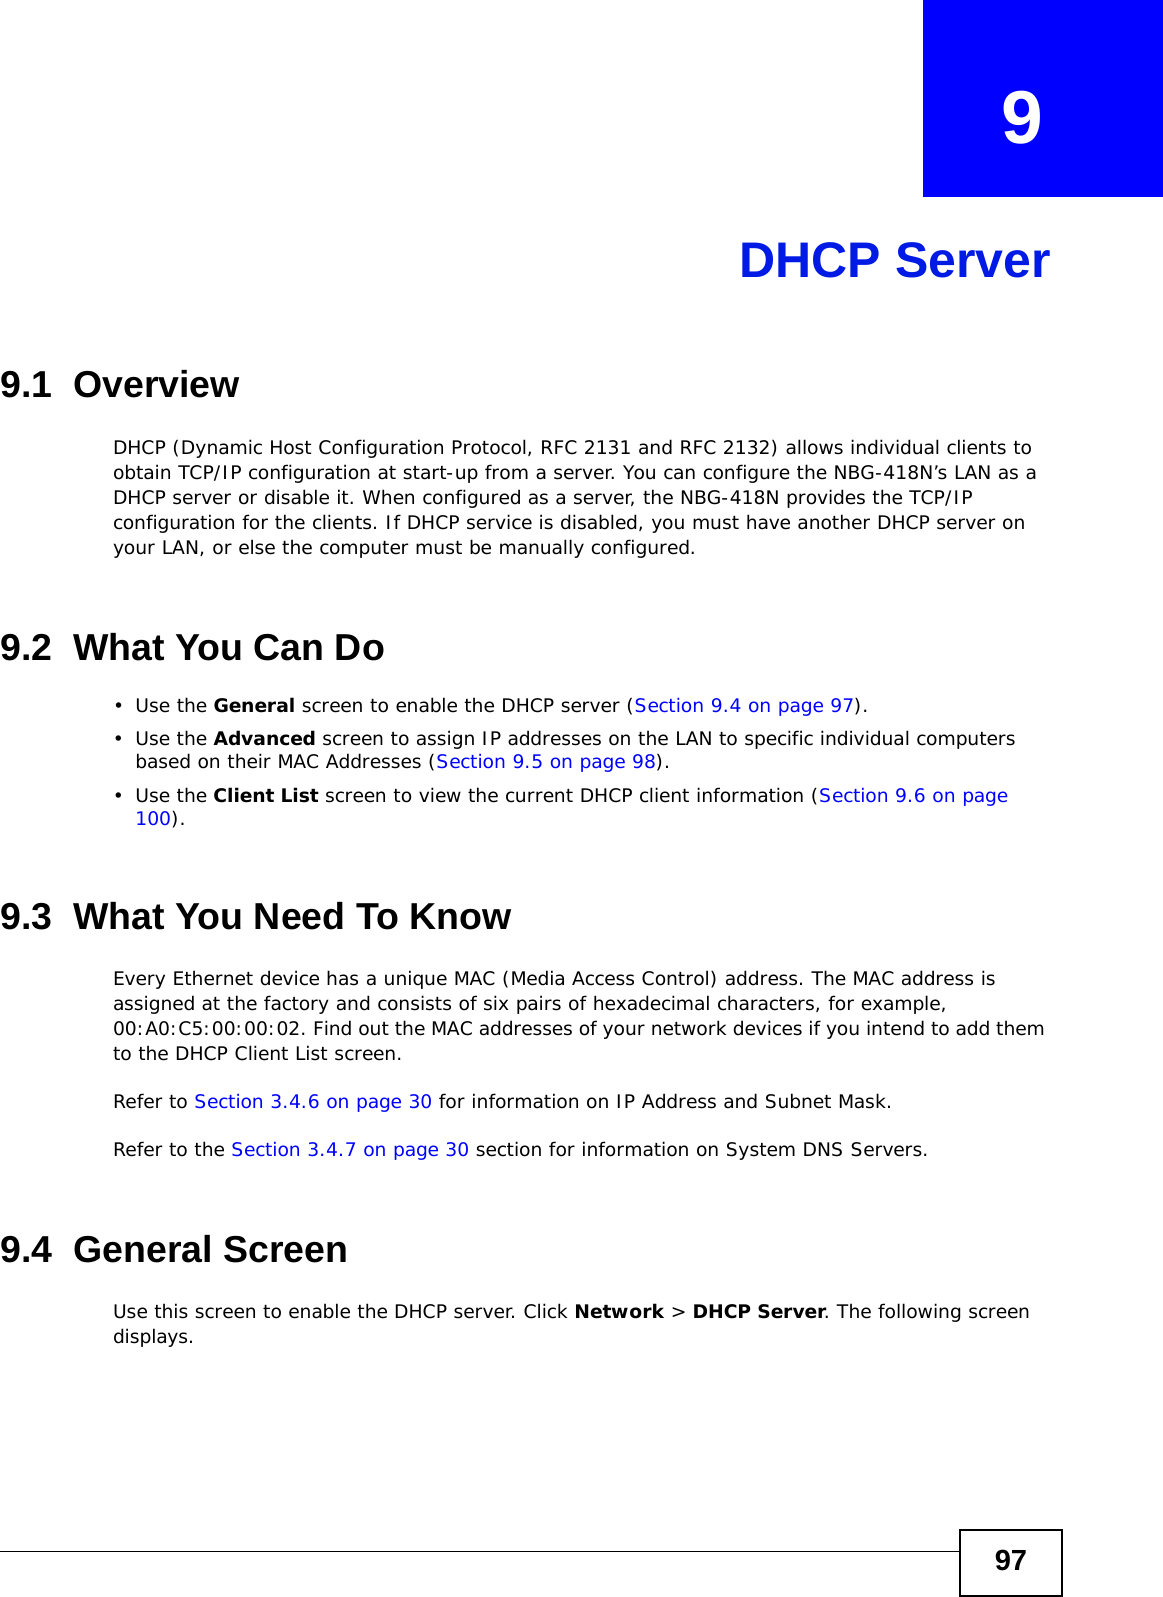 97CHAPTER   9DHCP Server9.1  OverviewDHCP (Dynamic Host Configuration Protocol, RFC 2131 and RFC 2132) allows individual clients to obtain TCP/IP configuration at start-up from a server. You can configure the NBG-418N’s LAN as a DHCP server or disable it. When configured as a server, the NBG-418N provides the TCP/IP configuration for the clients. If DHCP service is disabled, you must have another DHCP server on your LAN, or else the computer must be manually configured.9.2  What You Can Do•Use the General screen to enable the DHCP server (Section 9.4 on page 97).•Use the Advanced screen to assign IP addresses on the LAN to specific individual computers based on their MAC Addresses (Section 9.5 on page 98).•Use the Client List screen to view the current DHCP client information (Section 9.6 on page 100). 9.3  What You Need To KnowEvery Ethernet device has a unique MAC (Media Access Control) address. The MAC address is assigned at the factory and consists of six pairs of hexadecimal characters, for example, 00:A0:C5:00:00:02. Find out the MAC addresses of your network devices if you intend to add them to the DHCP Client List screen.Refer to Section 3.4.6 on page 30 for information on IP Address and Subnet Mask.Refer to the Section 3.4.7 on page 30 section for information on System DNS Servers.9.4  General ScreenUse this screen to enable the DHCP server. Click Network &gt; DHCP Server. The following screen displays.